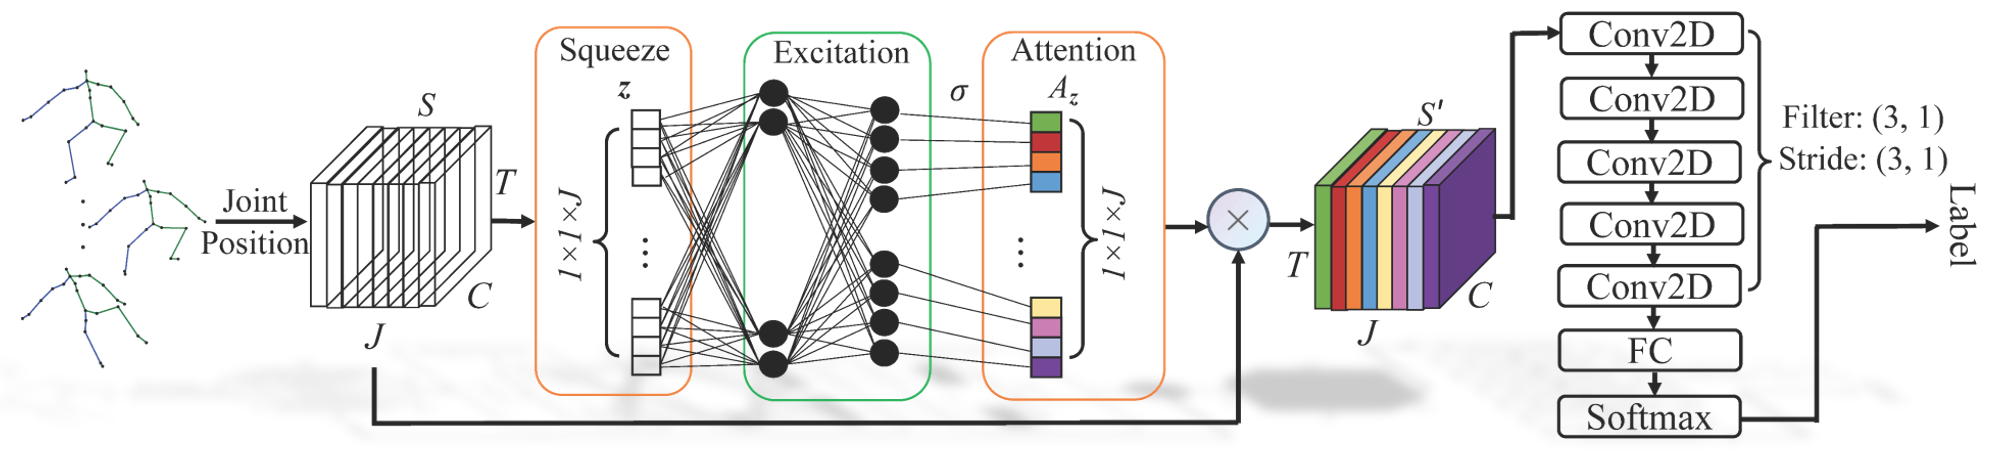 Interpreting Deep Learning Based Cerebral Palsy Prediction with Channel Attention